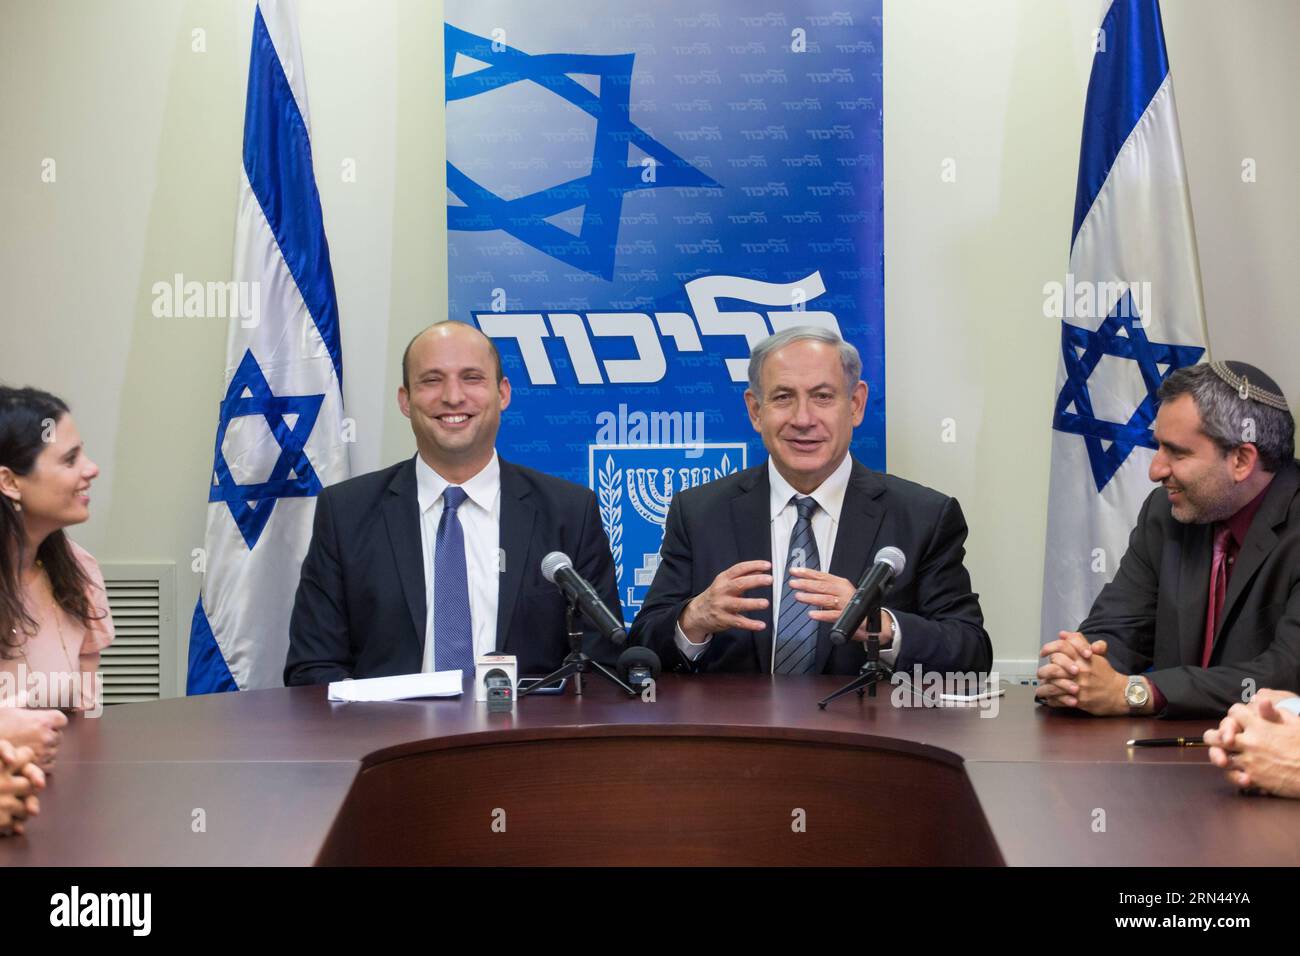 (150507) -- JERUSALEM, May 6, 2015 -- Israeli Prime Minister Benjamin Netanyahu (2nd R) and Jewish Home party leader Naftali Bennett (2nd L) hold a press conference in Jerusalem May 6, 2015. Benjamin Netanyahu managed to clinch a deal with the nationalist Jewish Home party late Wednesday night, securing a new ruling coalition with a tiny majority in the 120-member parliament. ) ISRAEL-NEW COALITION-PRESS CONFERENCE JINI PUBLICATIONxNOTxINxCHN   Jerusalem May 6 2015 Israeli Prime Ministers Benjamin Netanyahu 2nd r and Jewish Home Party Leader Naftali Bennett 2nd l Hold a Press Conference in Jer Stock Photo